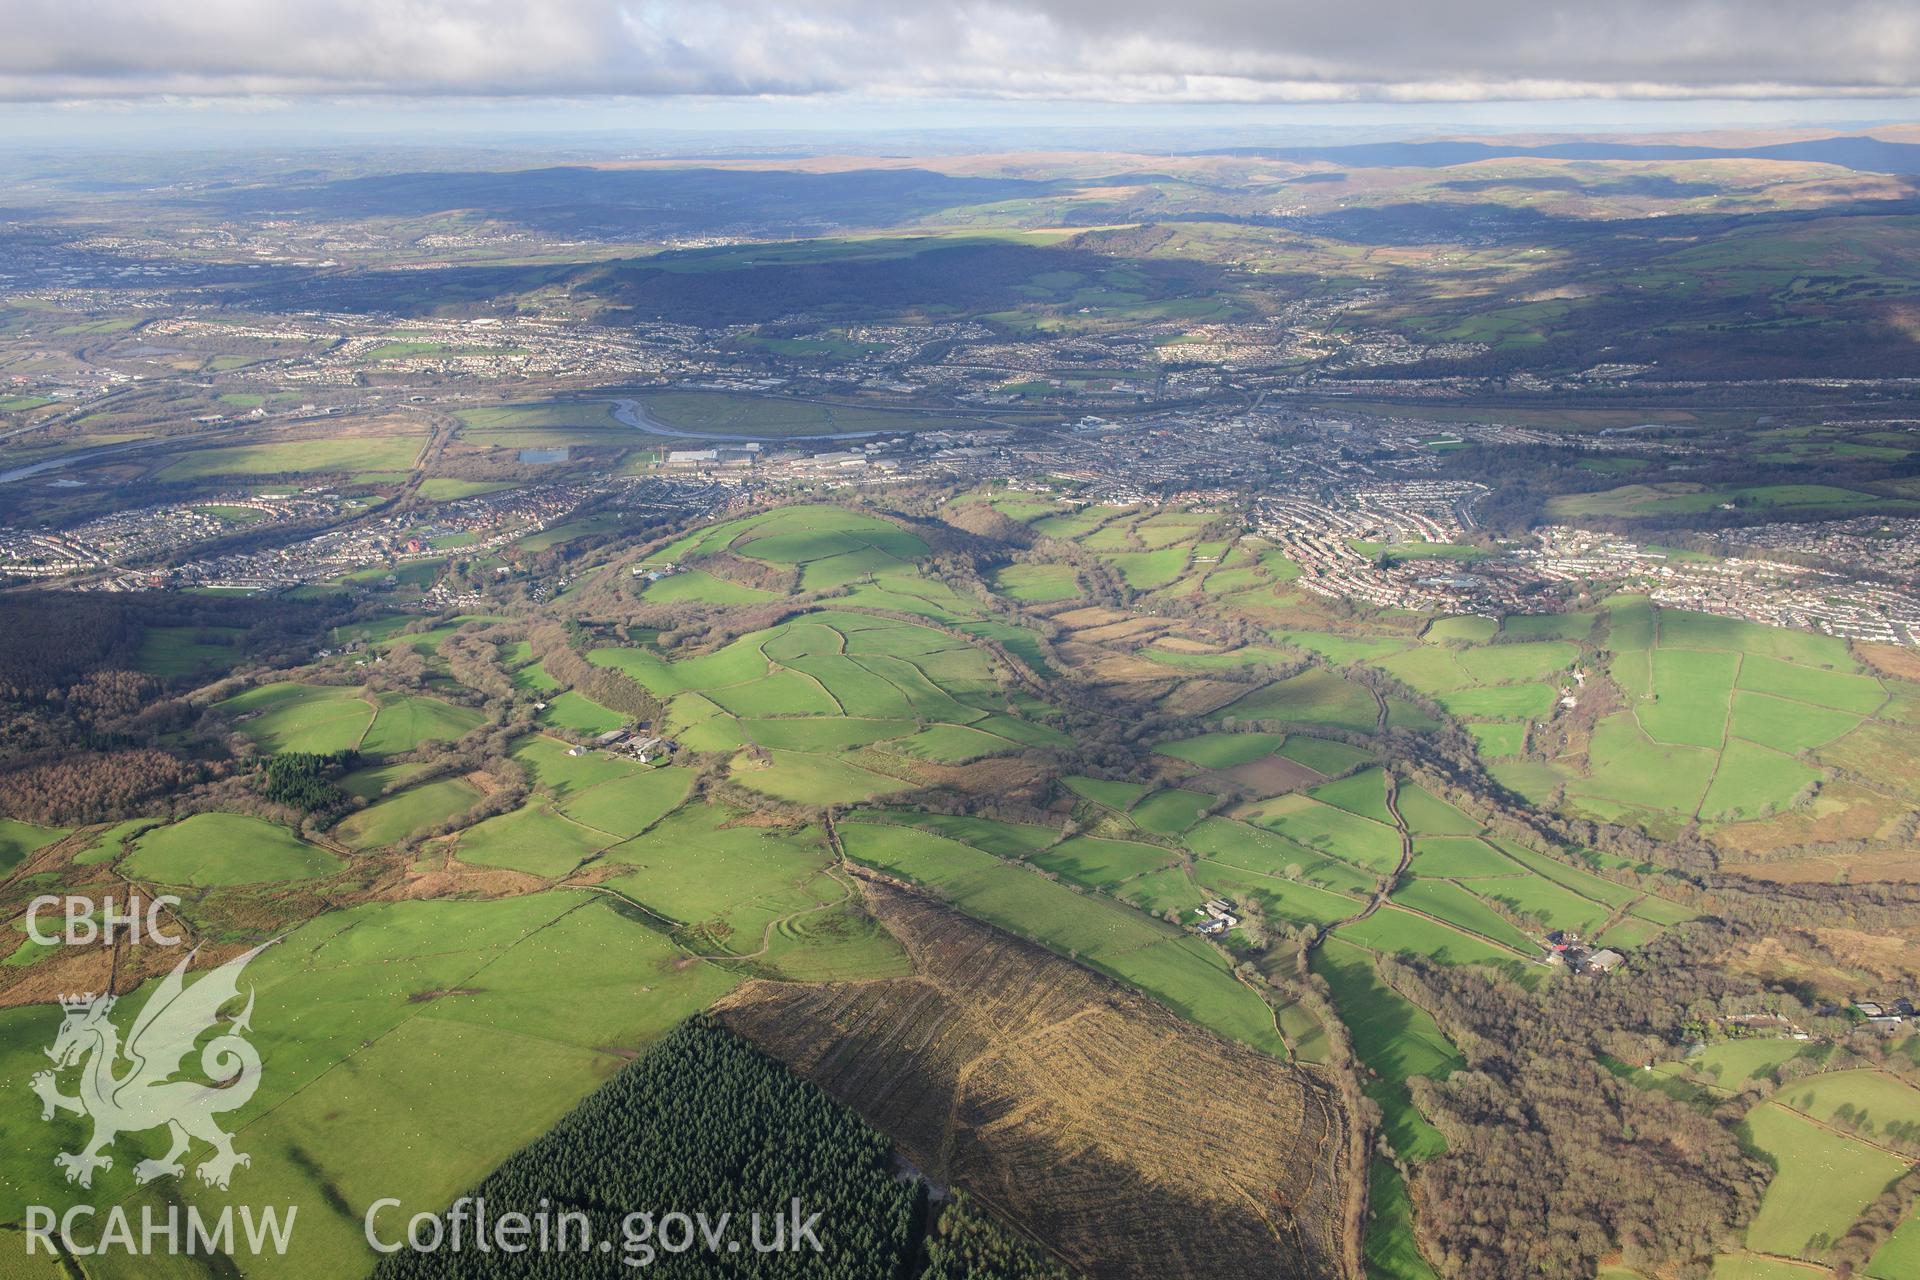 RCAHMW colour oblique photograph of Gaer Fawr, wide landscape view looking west. Taken by Toby Driver on 28/11/2012.